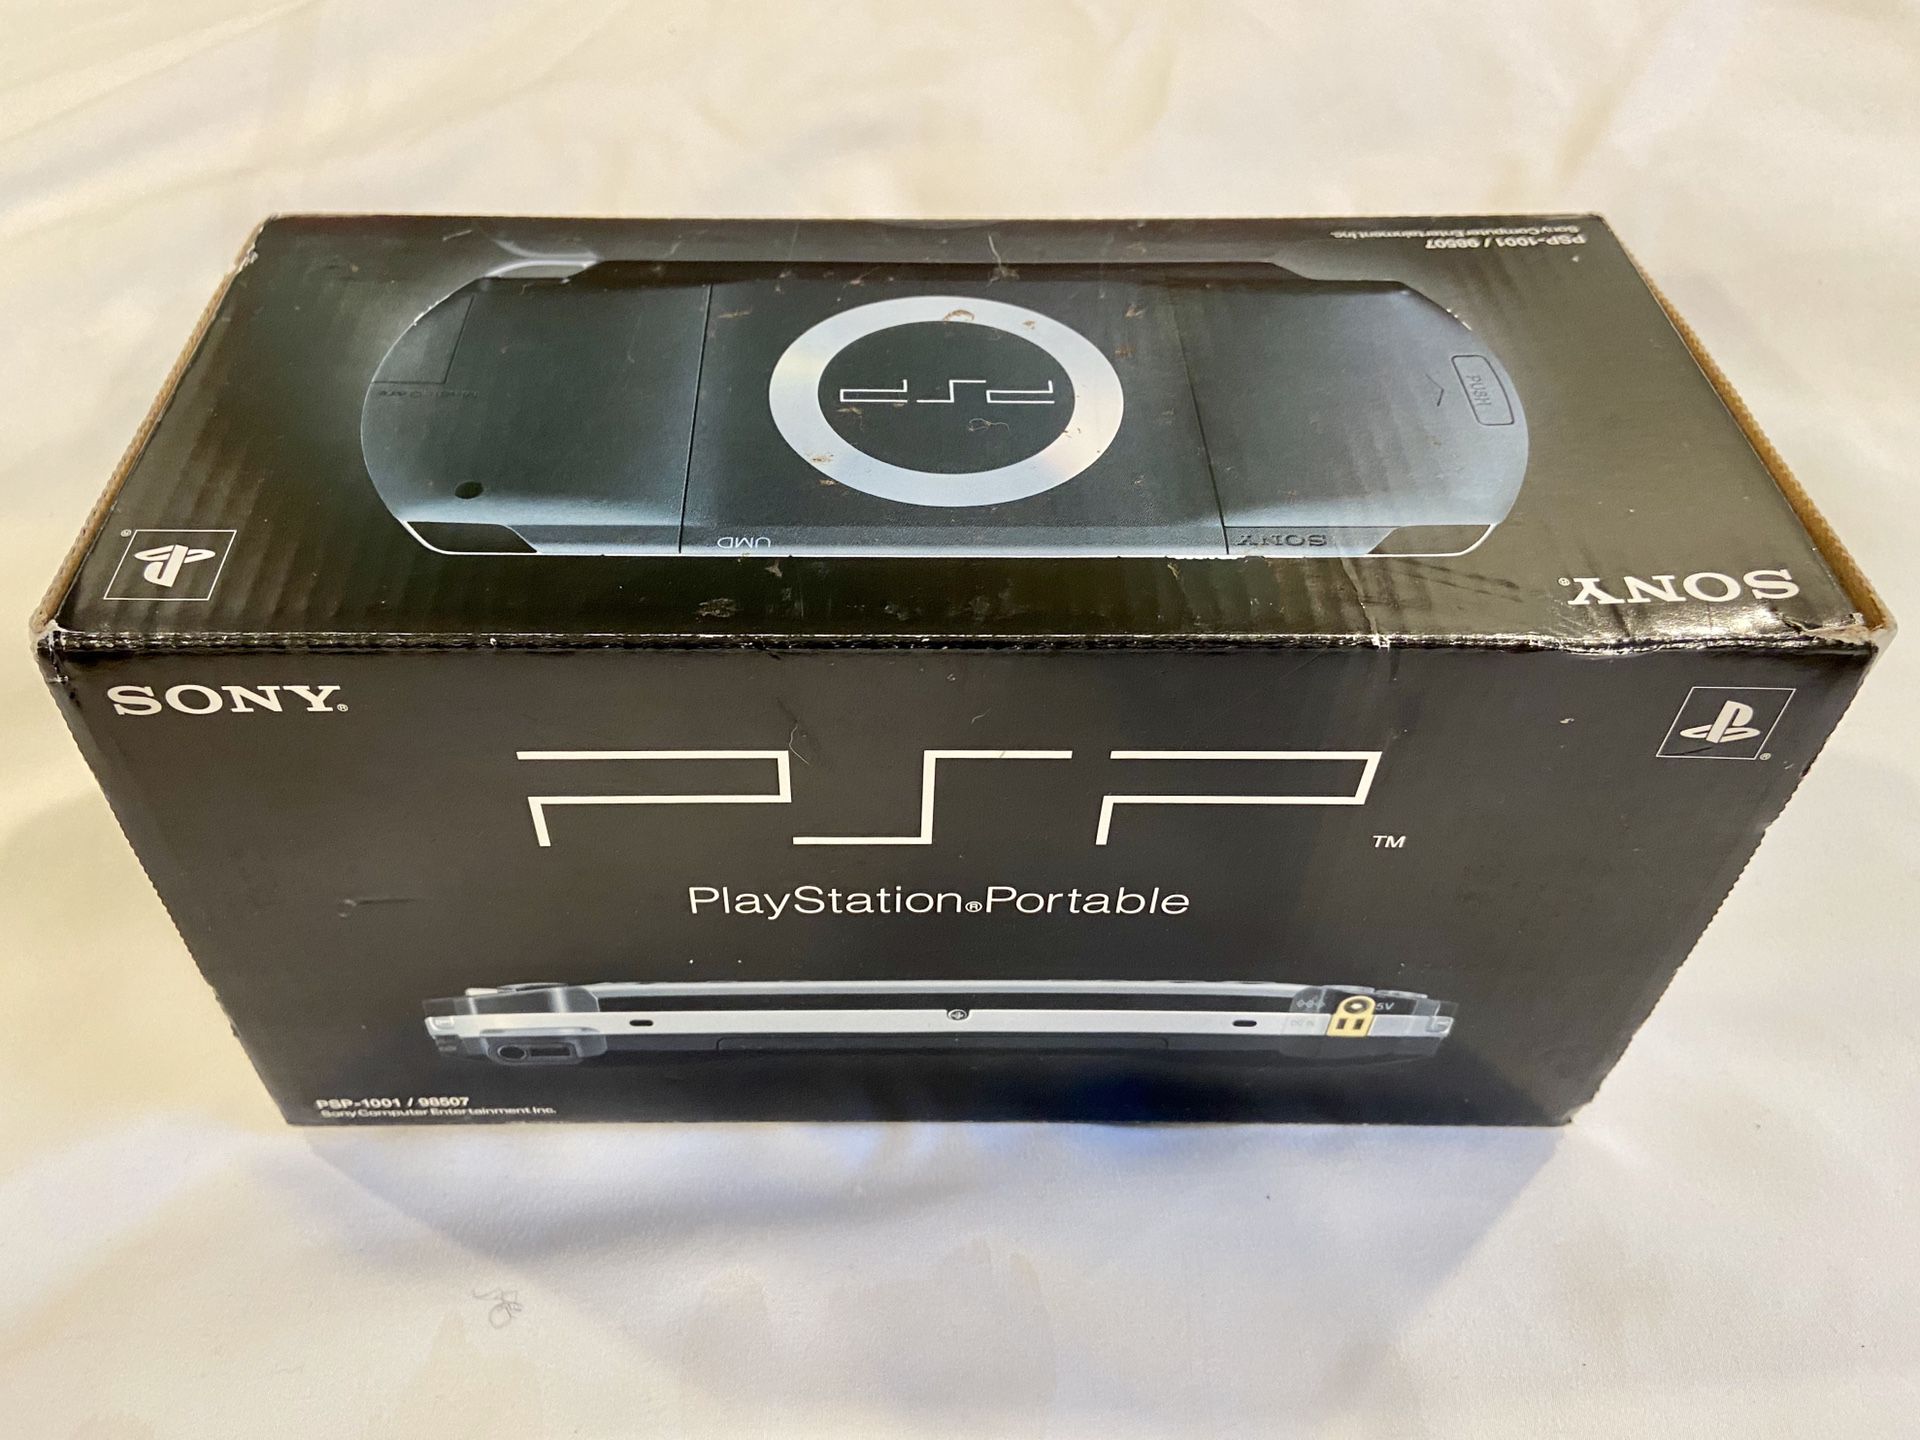 Unopened Brand New Sony PlayStation Portable Core PSP 1000 Black Handheld PSP-1001